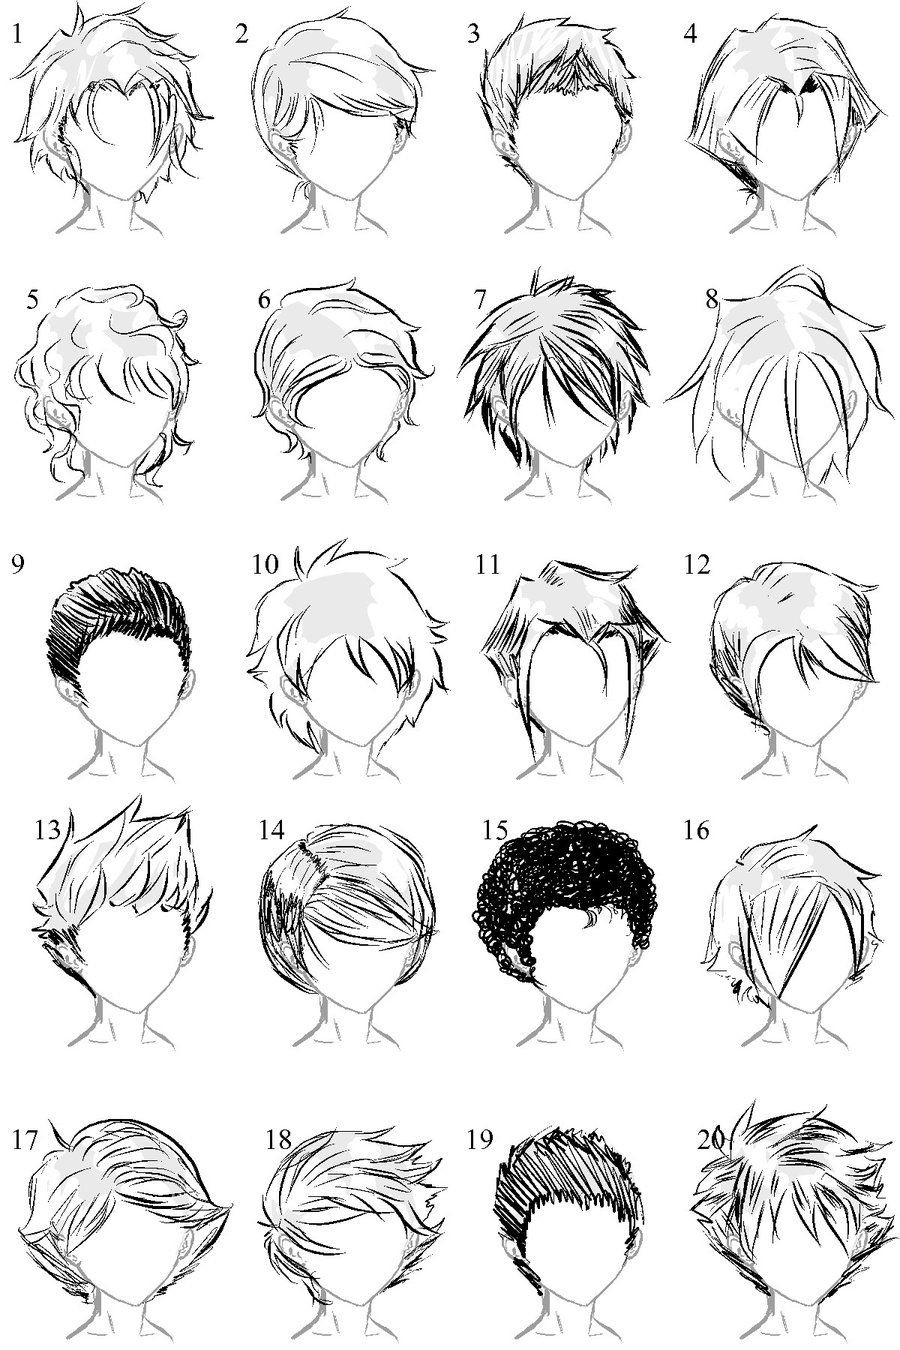 Draw Anime Hairstyles
 20 More Male Hairstyles by LazyCatSleepsDaily on